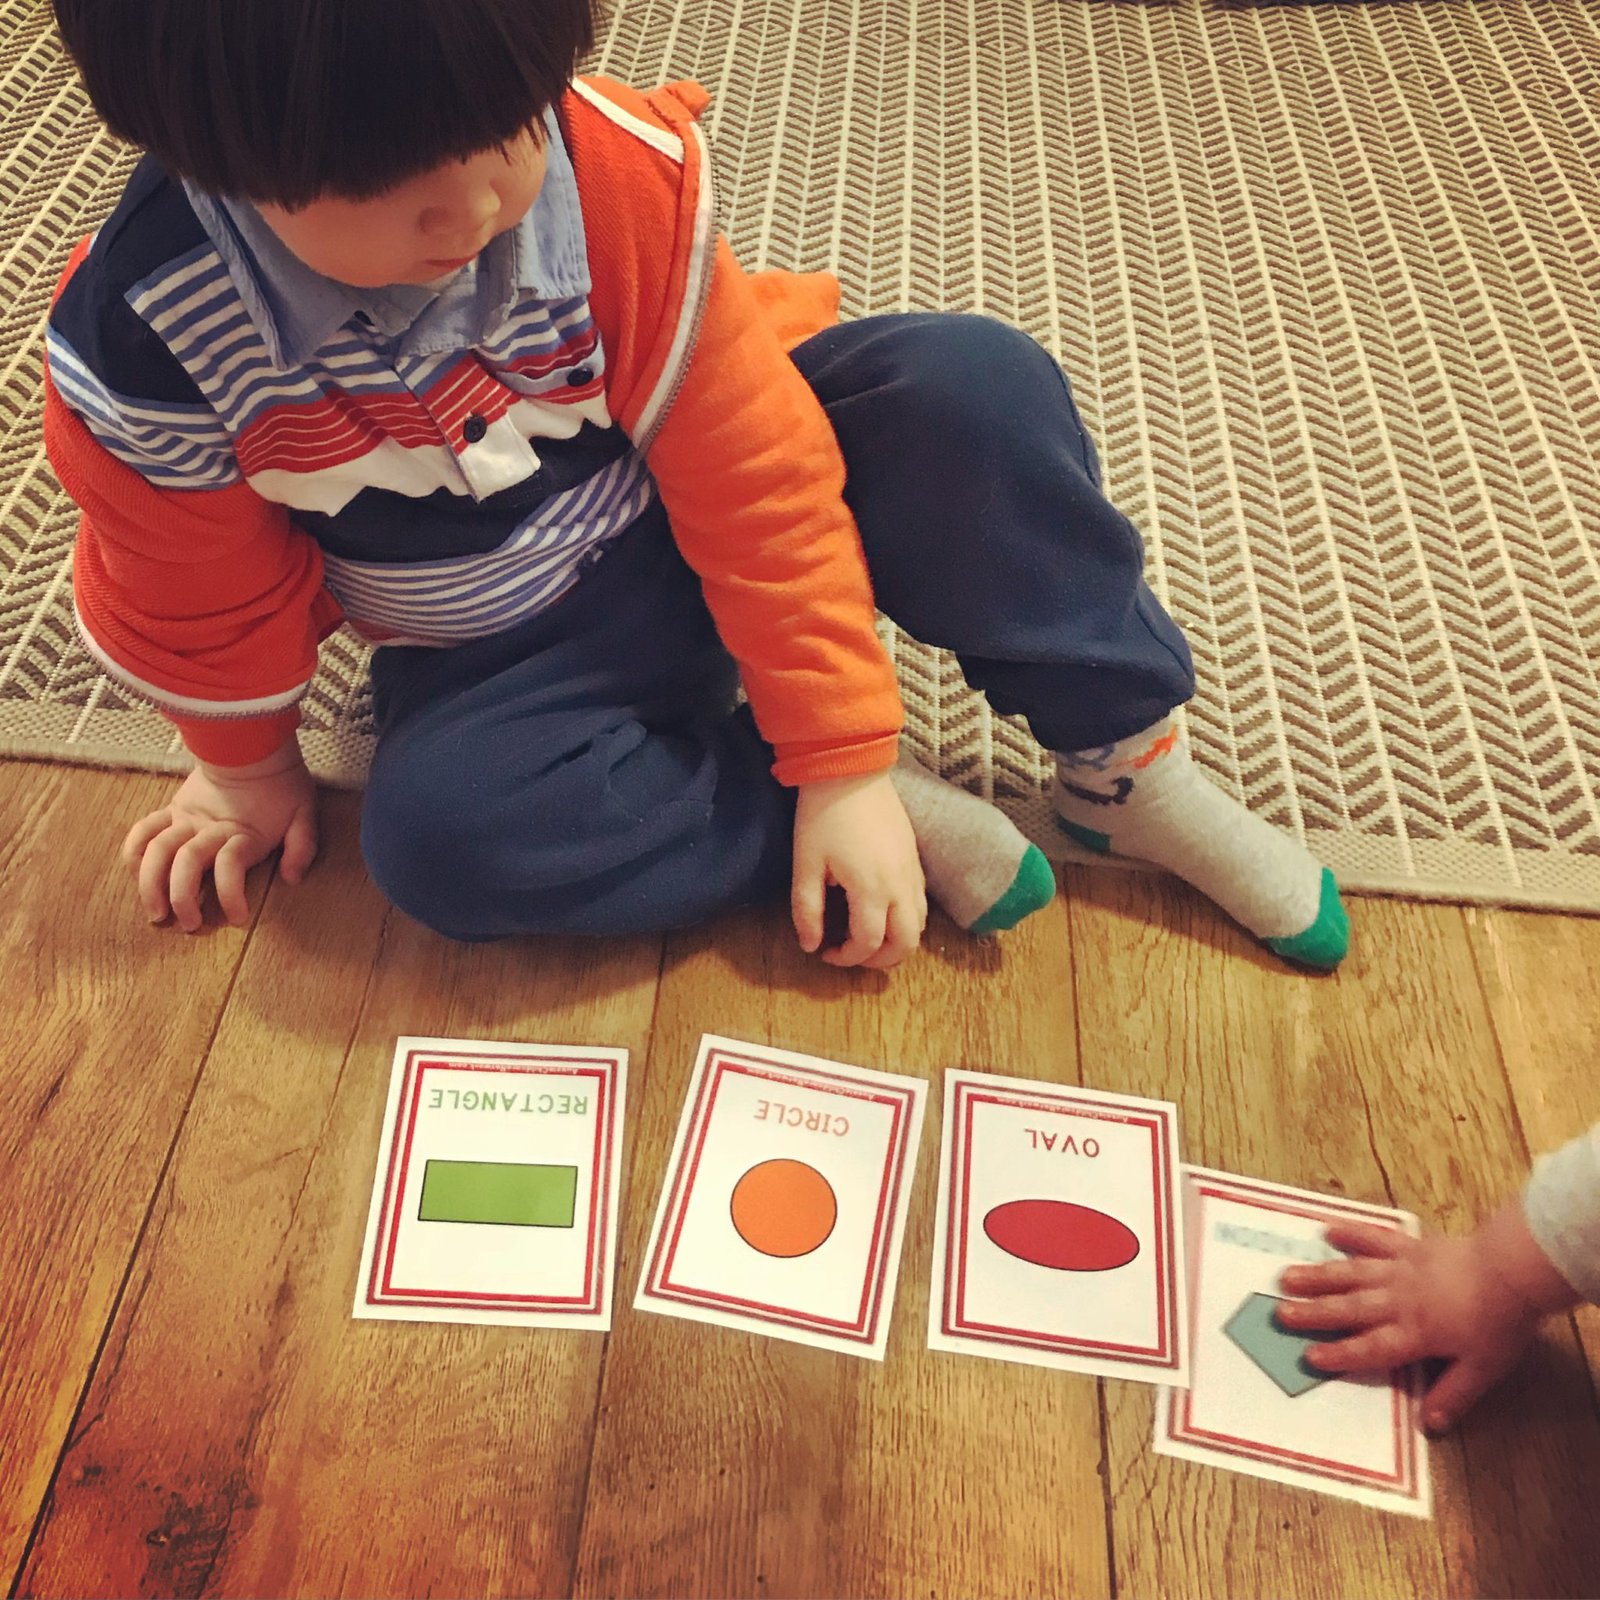 Color is one of the first ways the children makes distinctions among things they see; color words are some of the first words they use to describe these things.